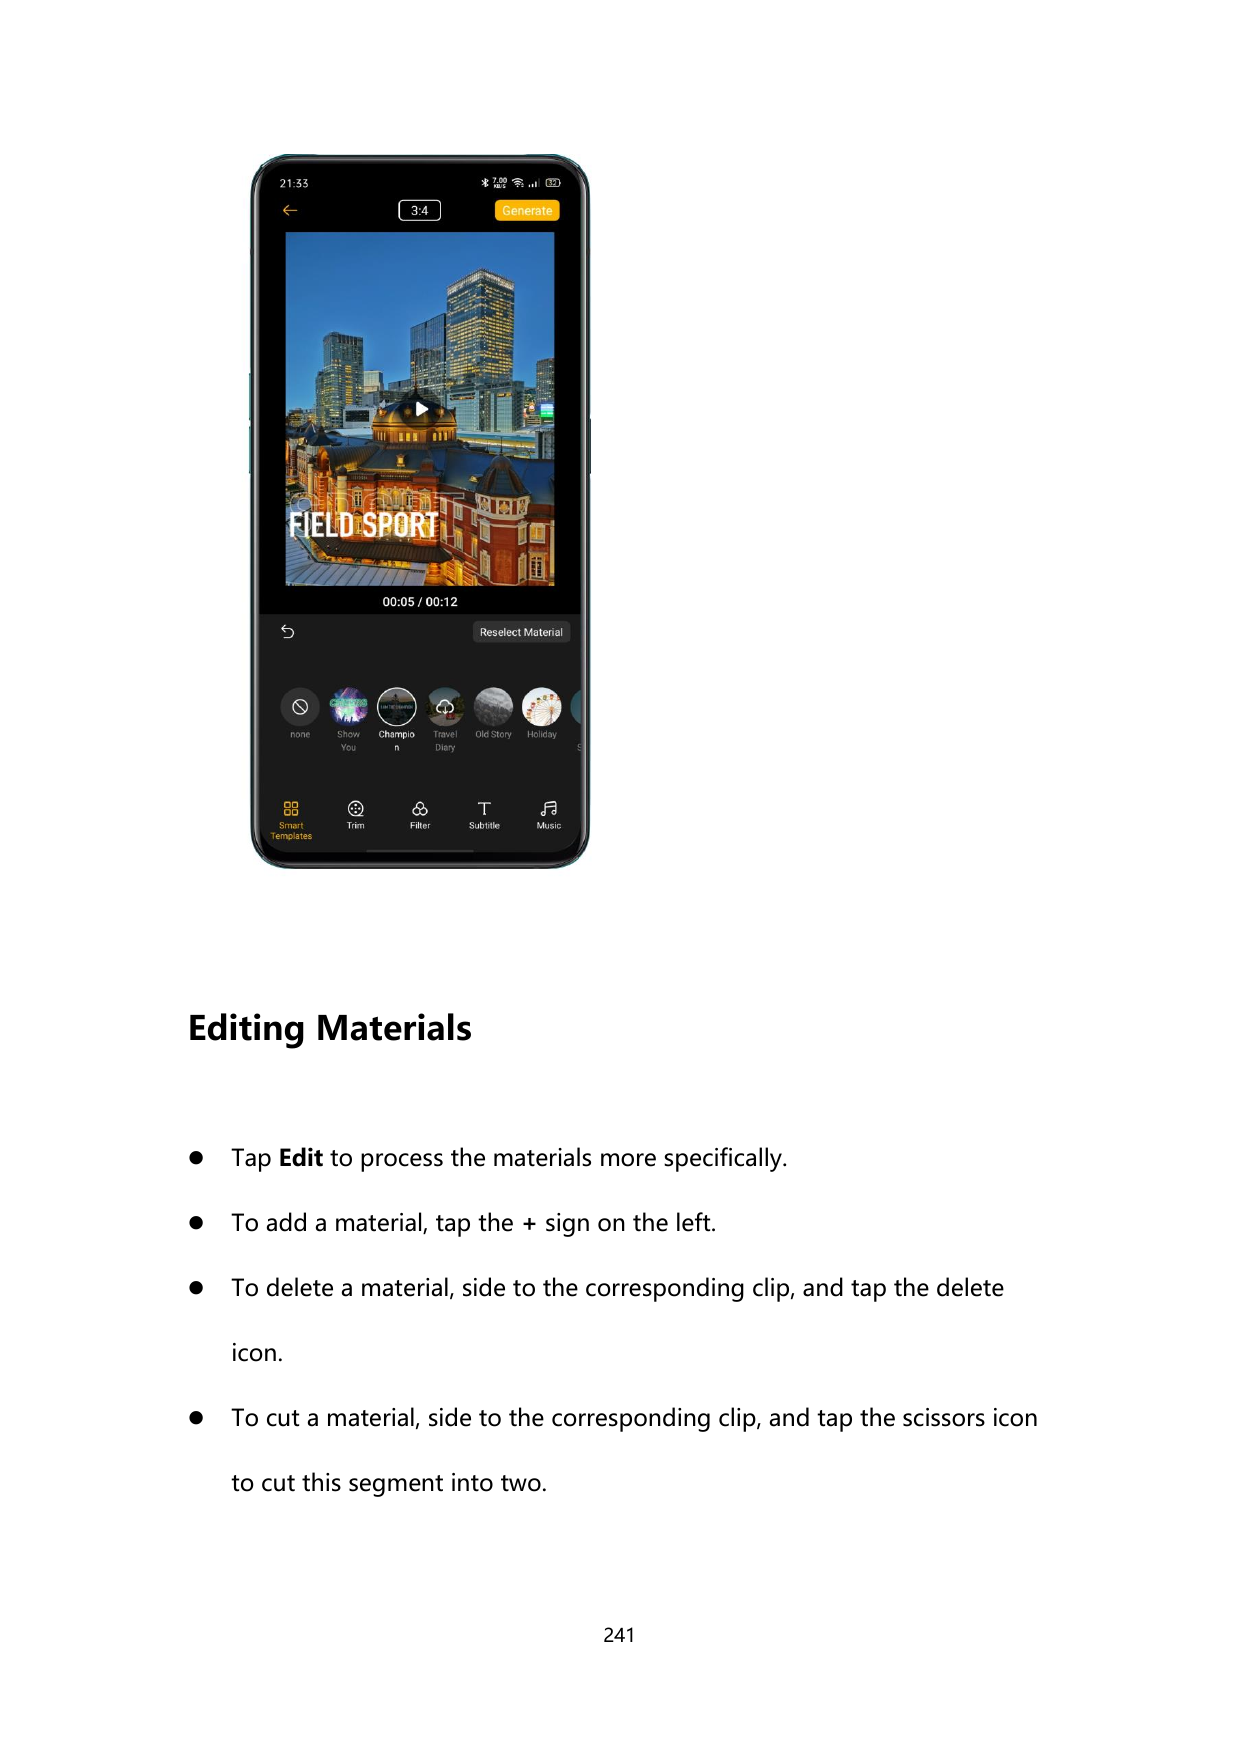 Editing MaterialsTap Edit to process the materials more specifically.To add a material, tap the + sign on the left.To delete 